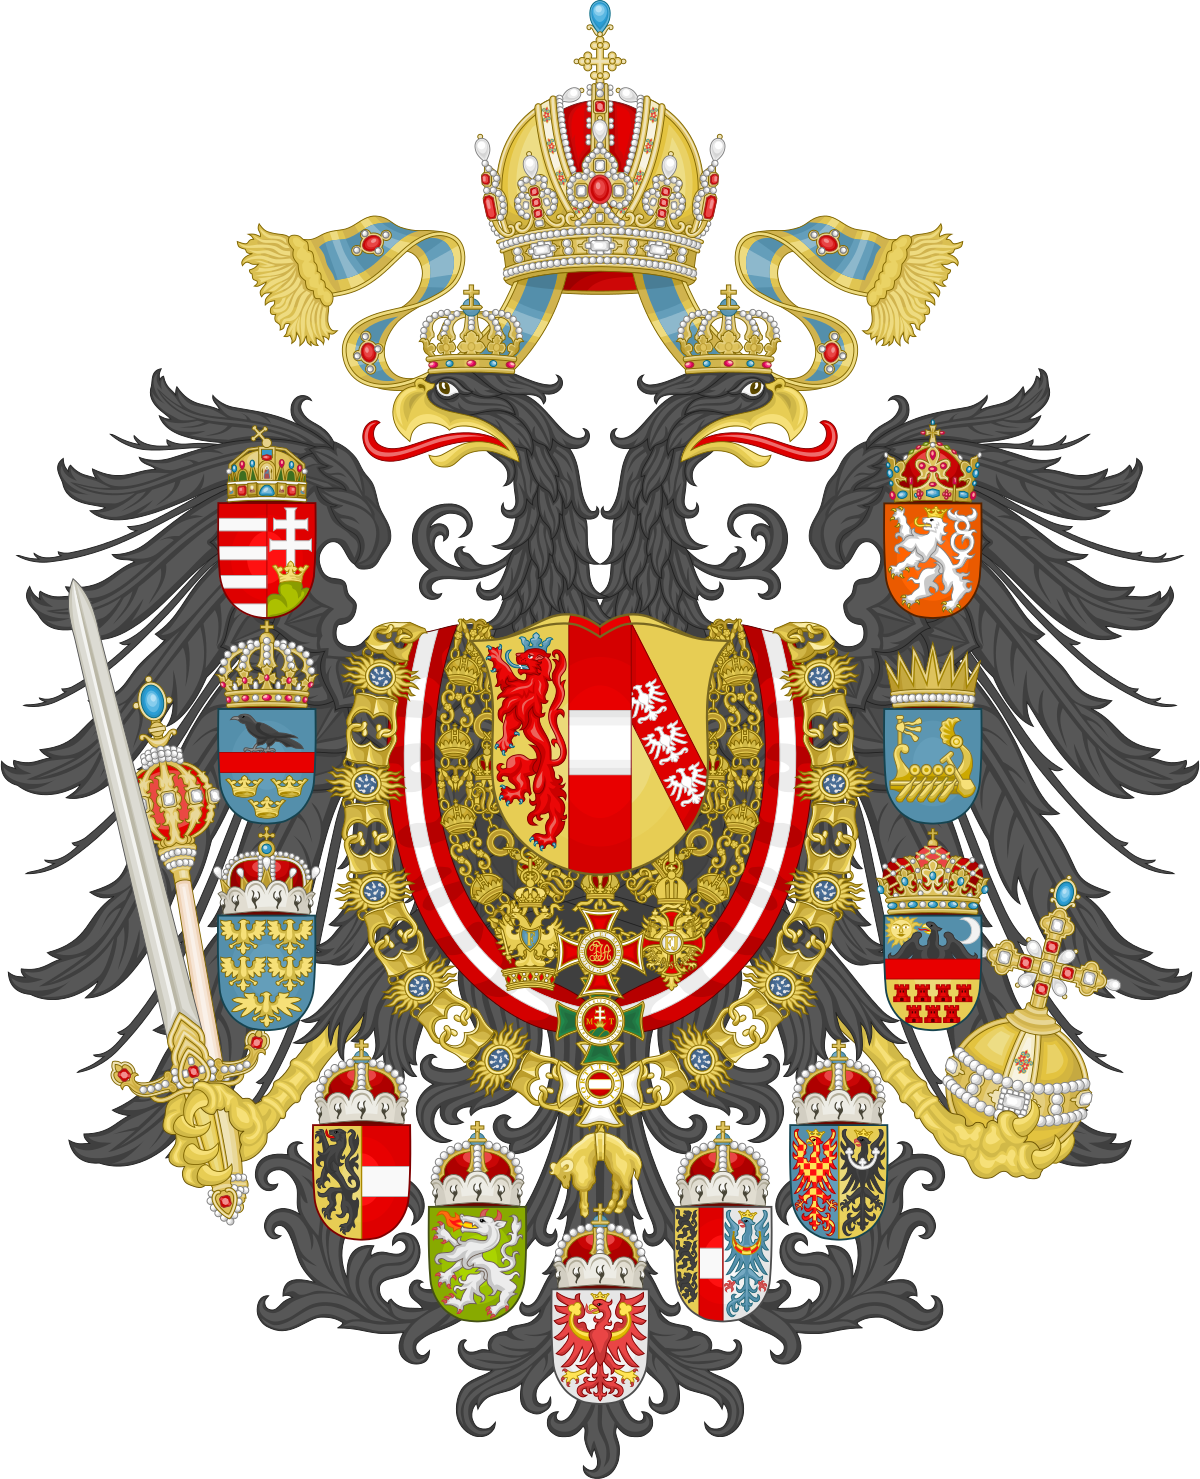 Imperial Coat Of Arms Of The Empire Of Austria - Austria Coat Of Arms (1200x1479)